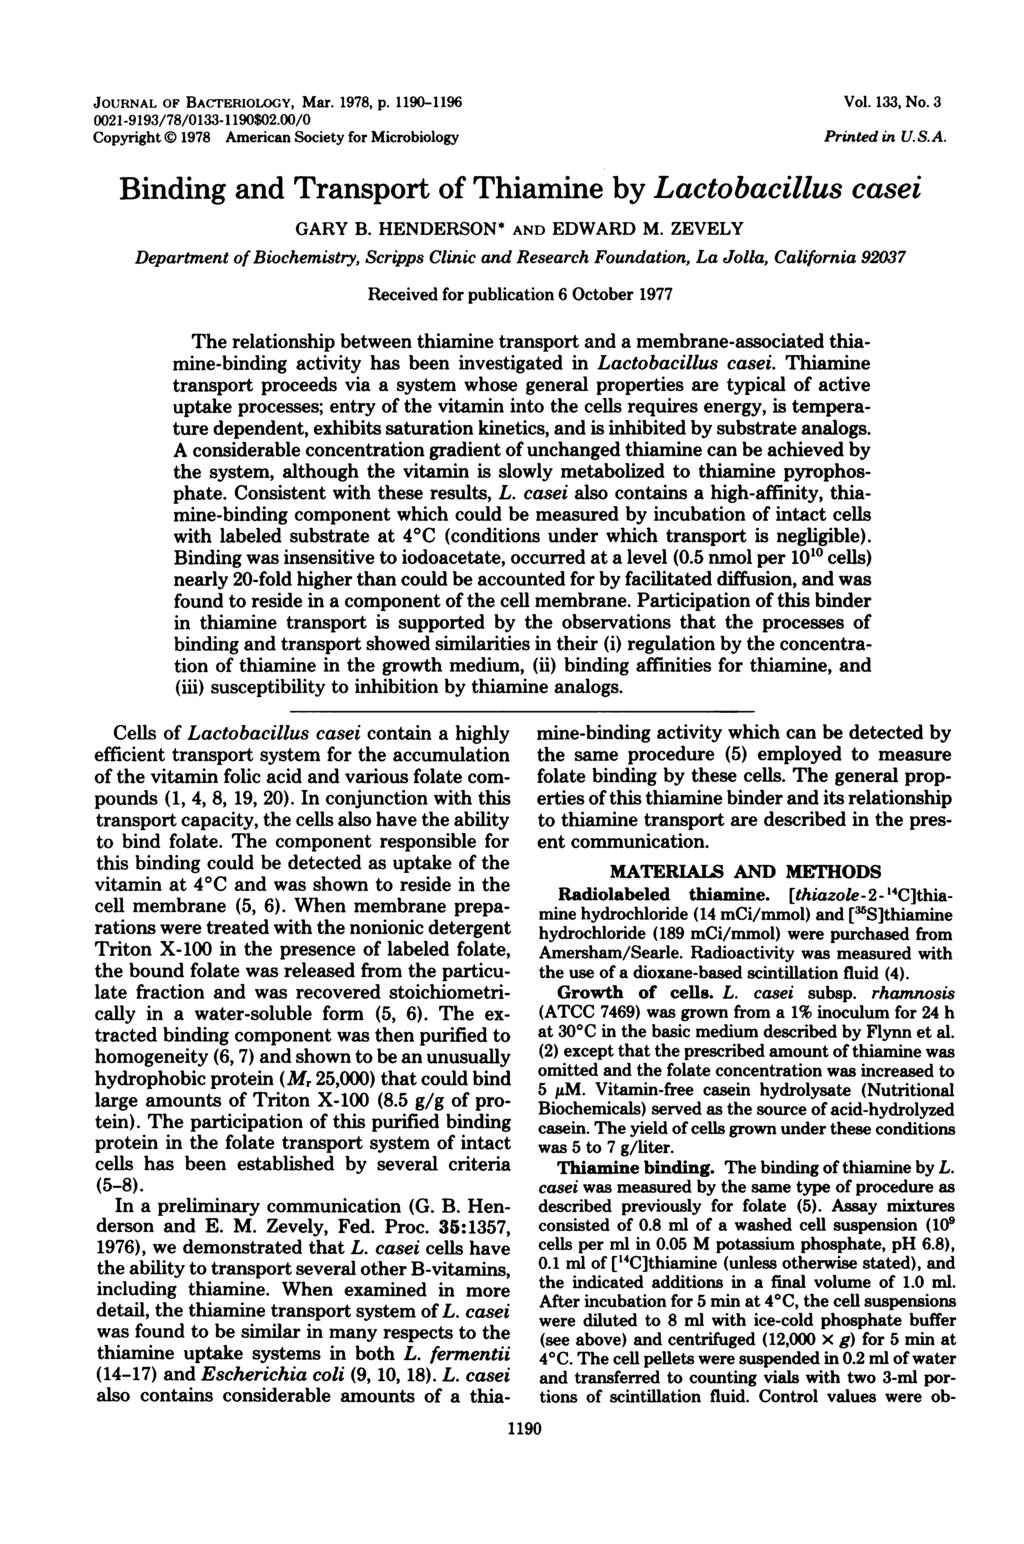 JOURNAL OF BACTRIOLOGY, Mar. 1978, P. 119-1196 21-9193/78/133-1 19$2./ Copyright 1978 Amerian Soiety for Mirobiology Vol. 133, No. 3 Printed in U.S.A. Binding and Transport of Thiamine by Latobaillus asei GARY B.